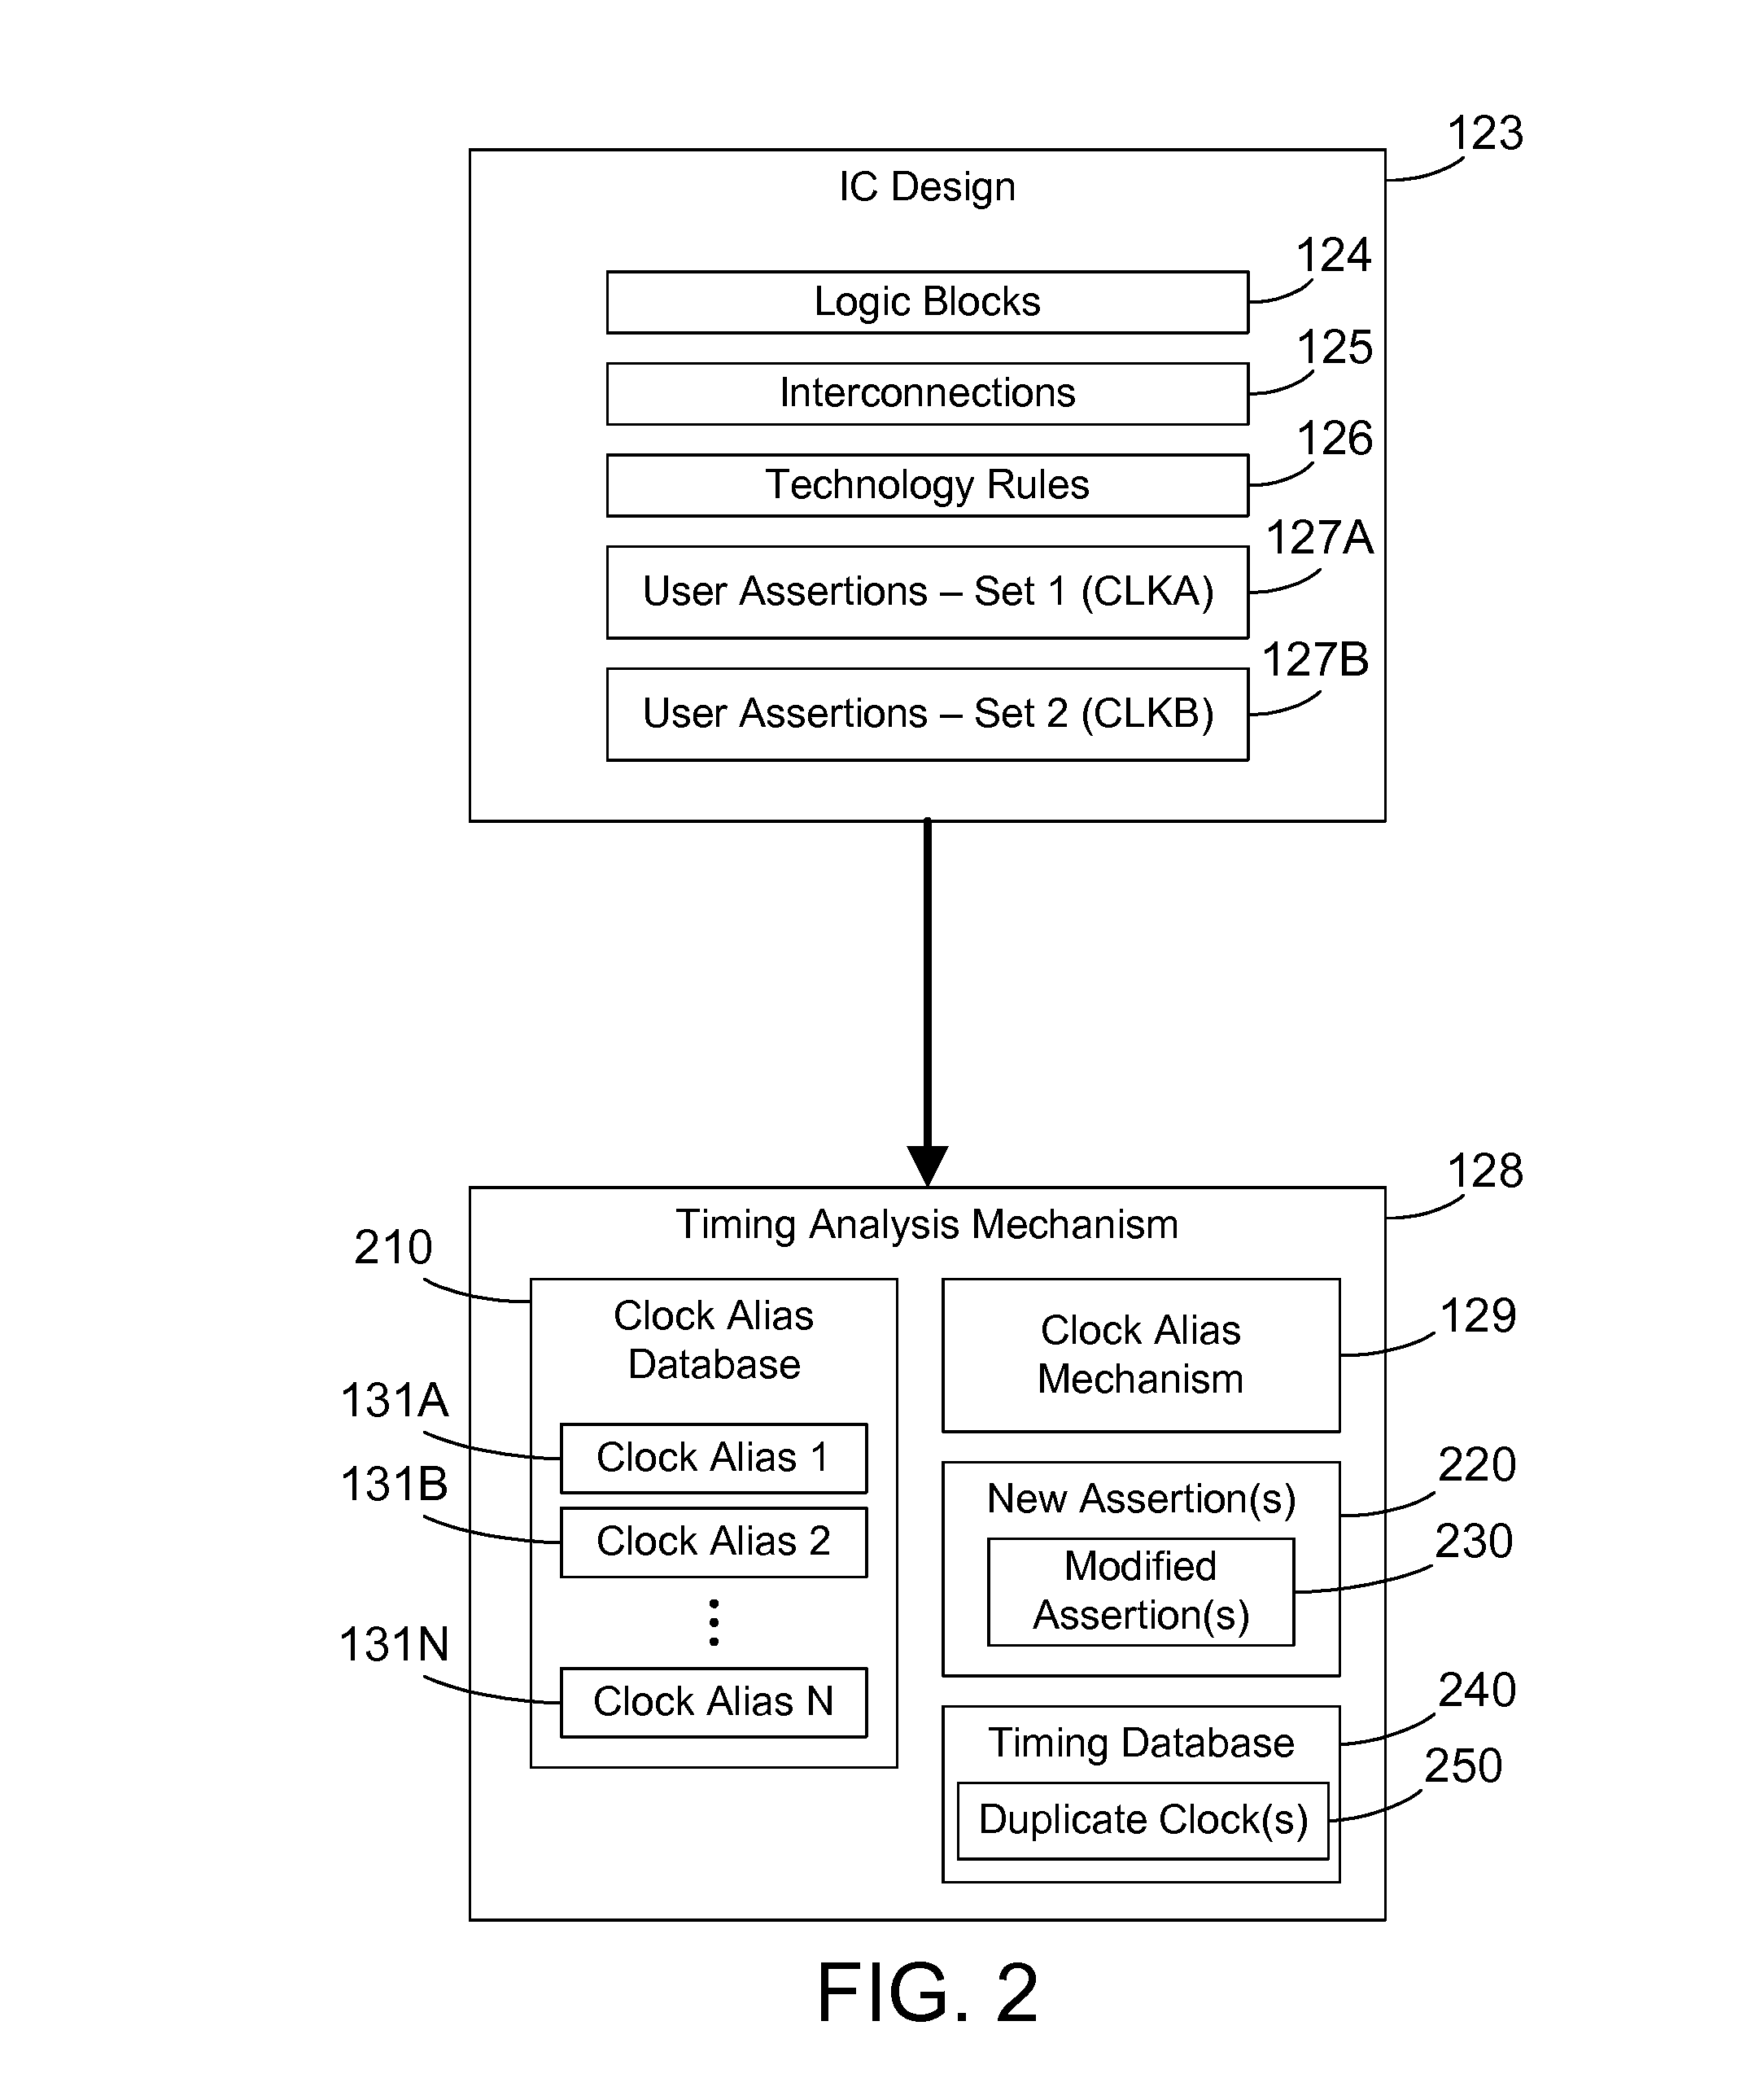 Clock alias for timing analysis of an integrated circuit design